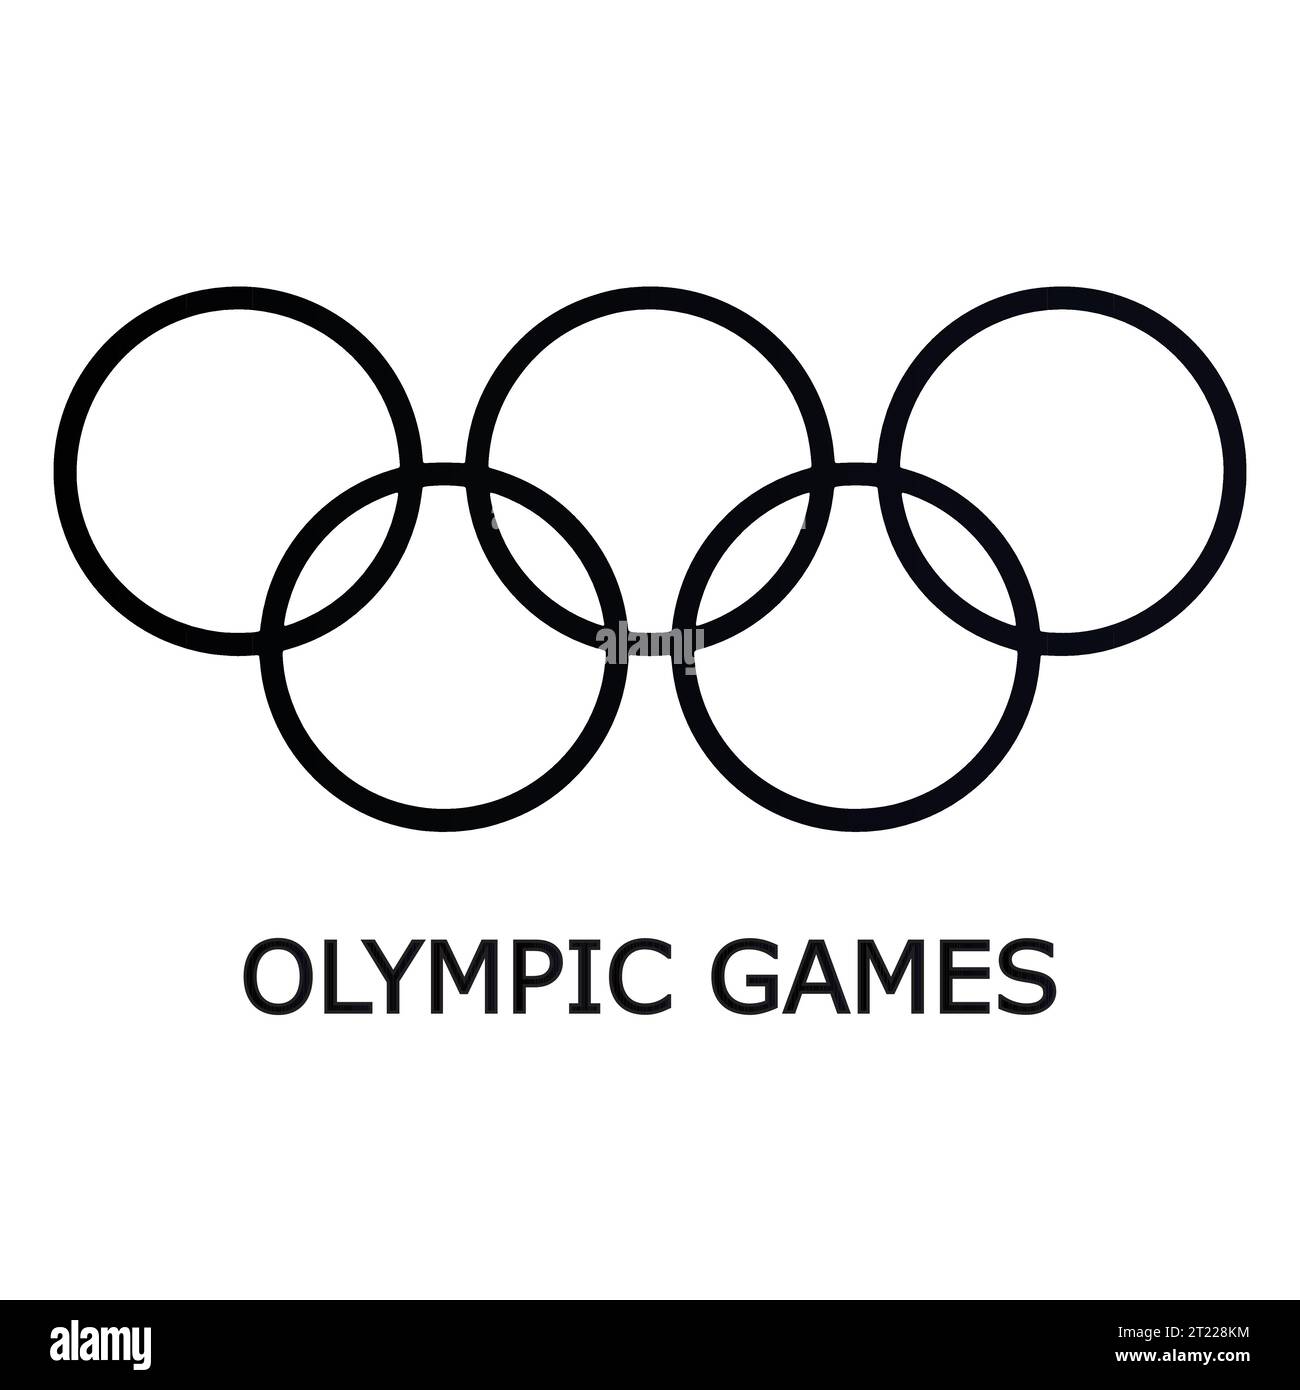 Olympic Games Logo Black, Vector Illustration Abstract Editable image Stock Vector